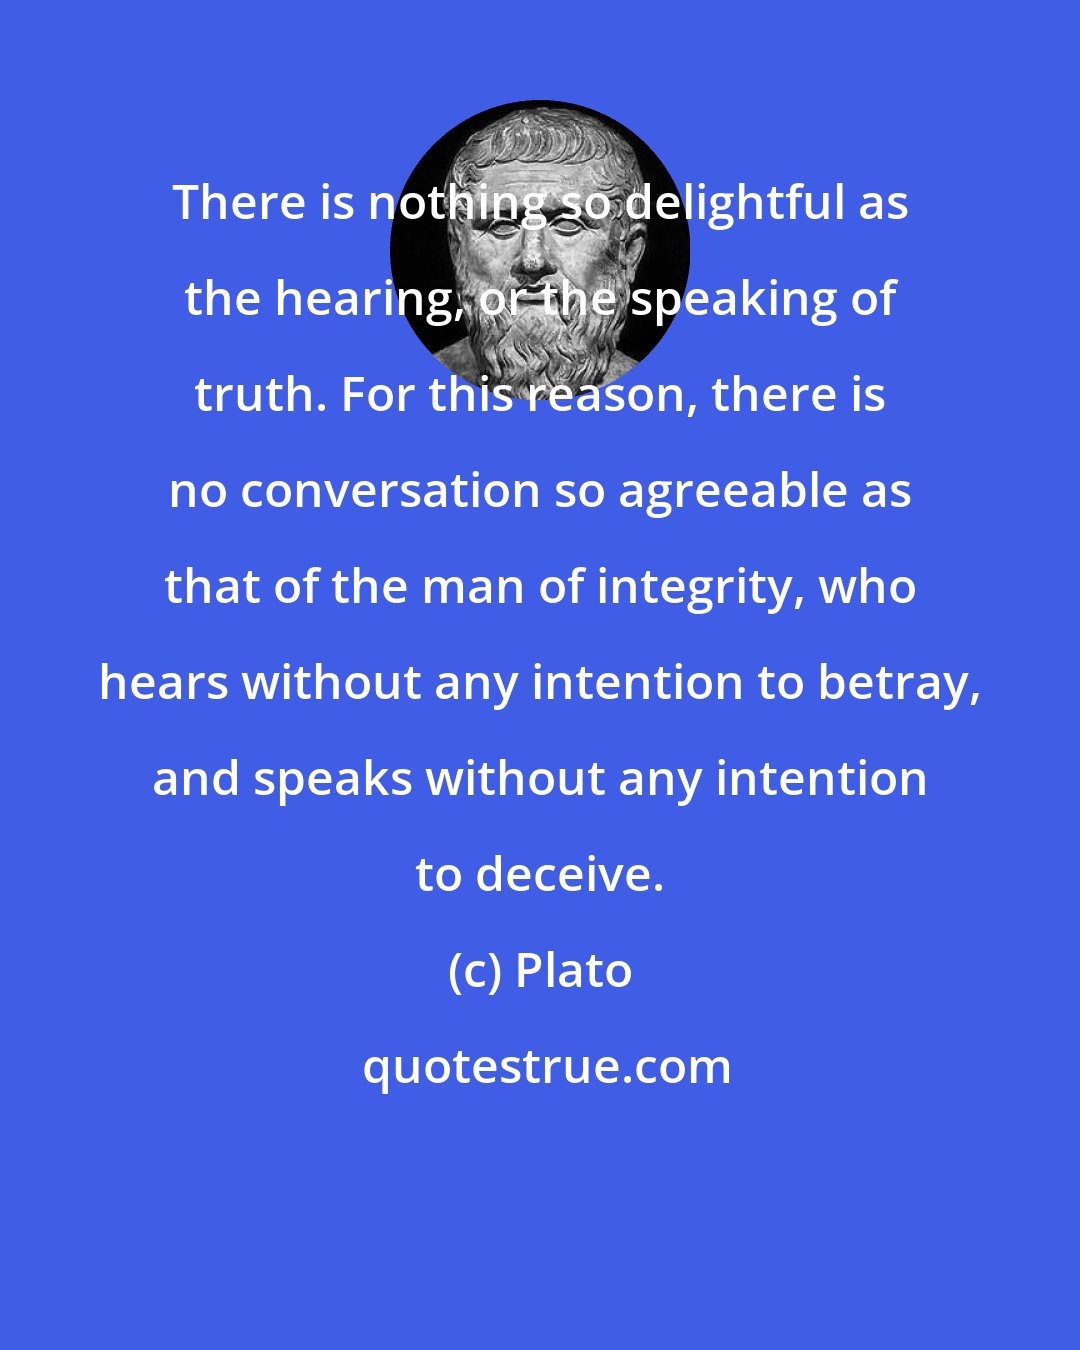 Plato: There is nothing so delightful as the hearing, or the speaking of truth. For this reason, there is no conversation so agreeable as that of the man of integrity, who hears without any intention to betray, and speaks without any intention to deceive.